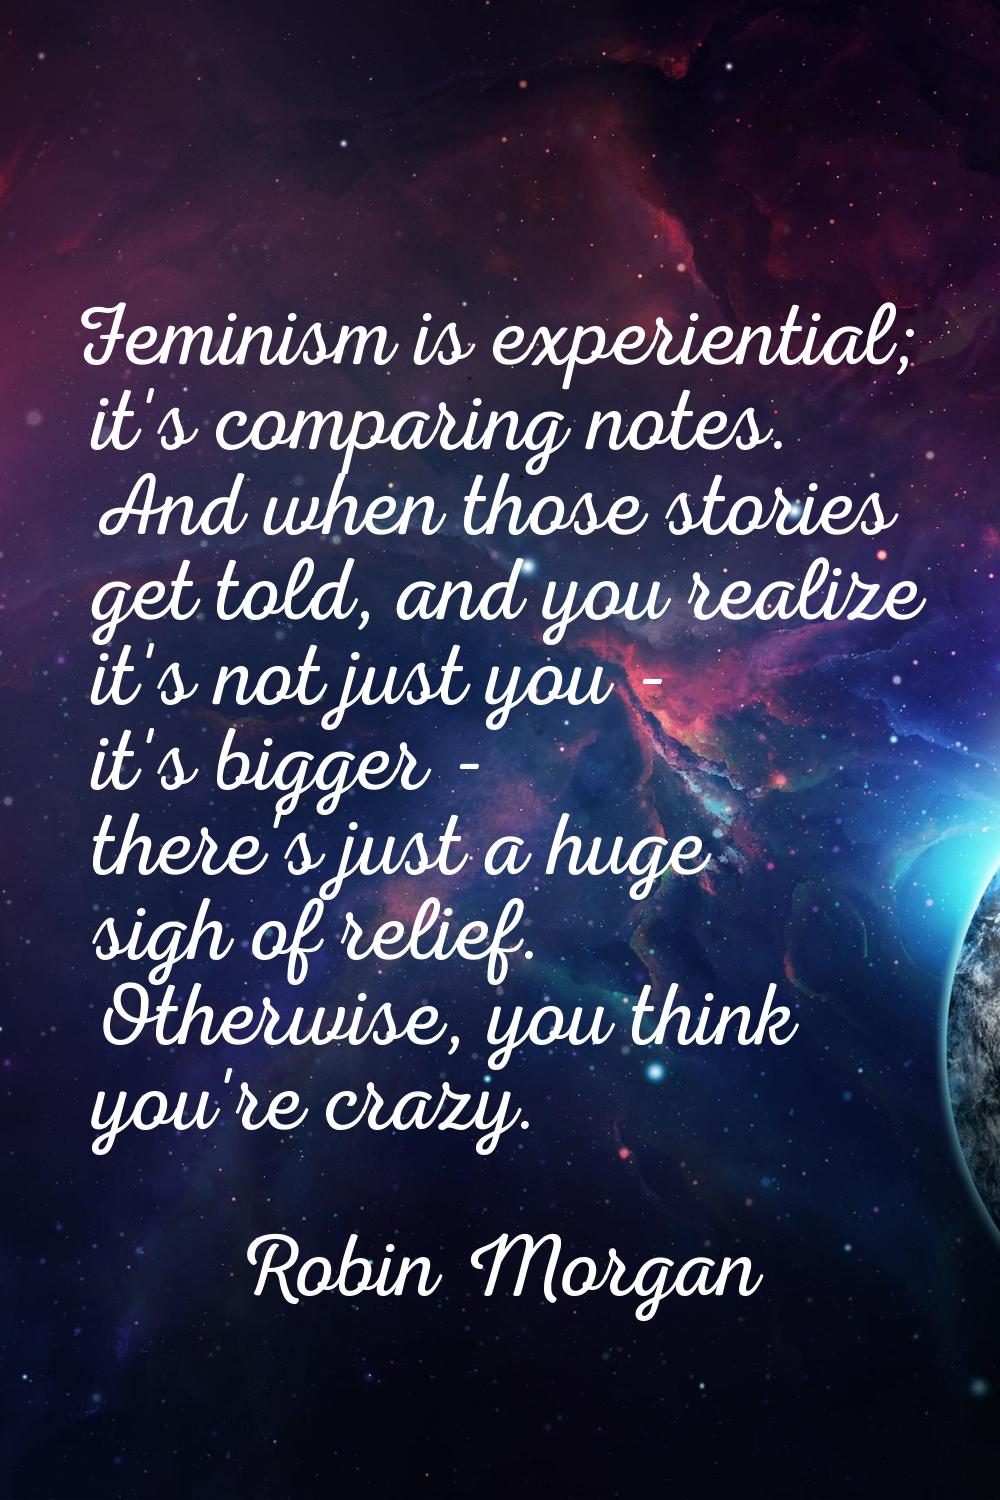 Feminism is experiential; it's comparing notes. And when those stories get told, and you realize it